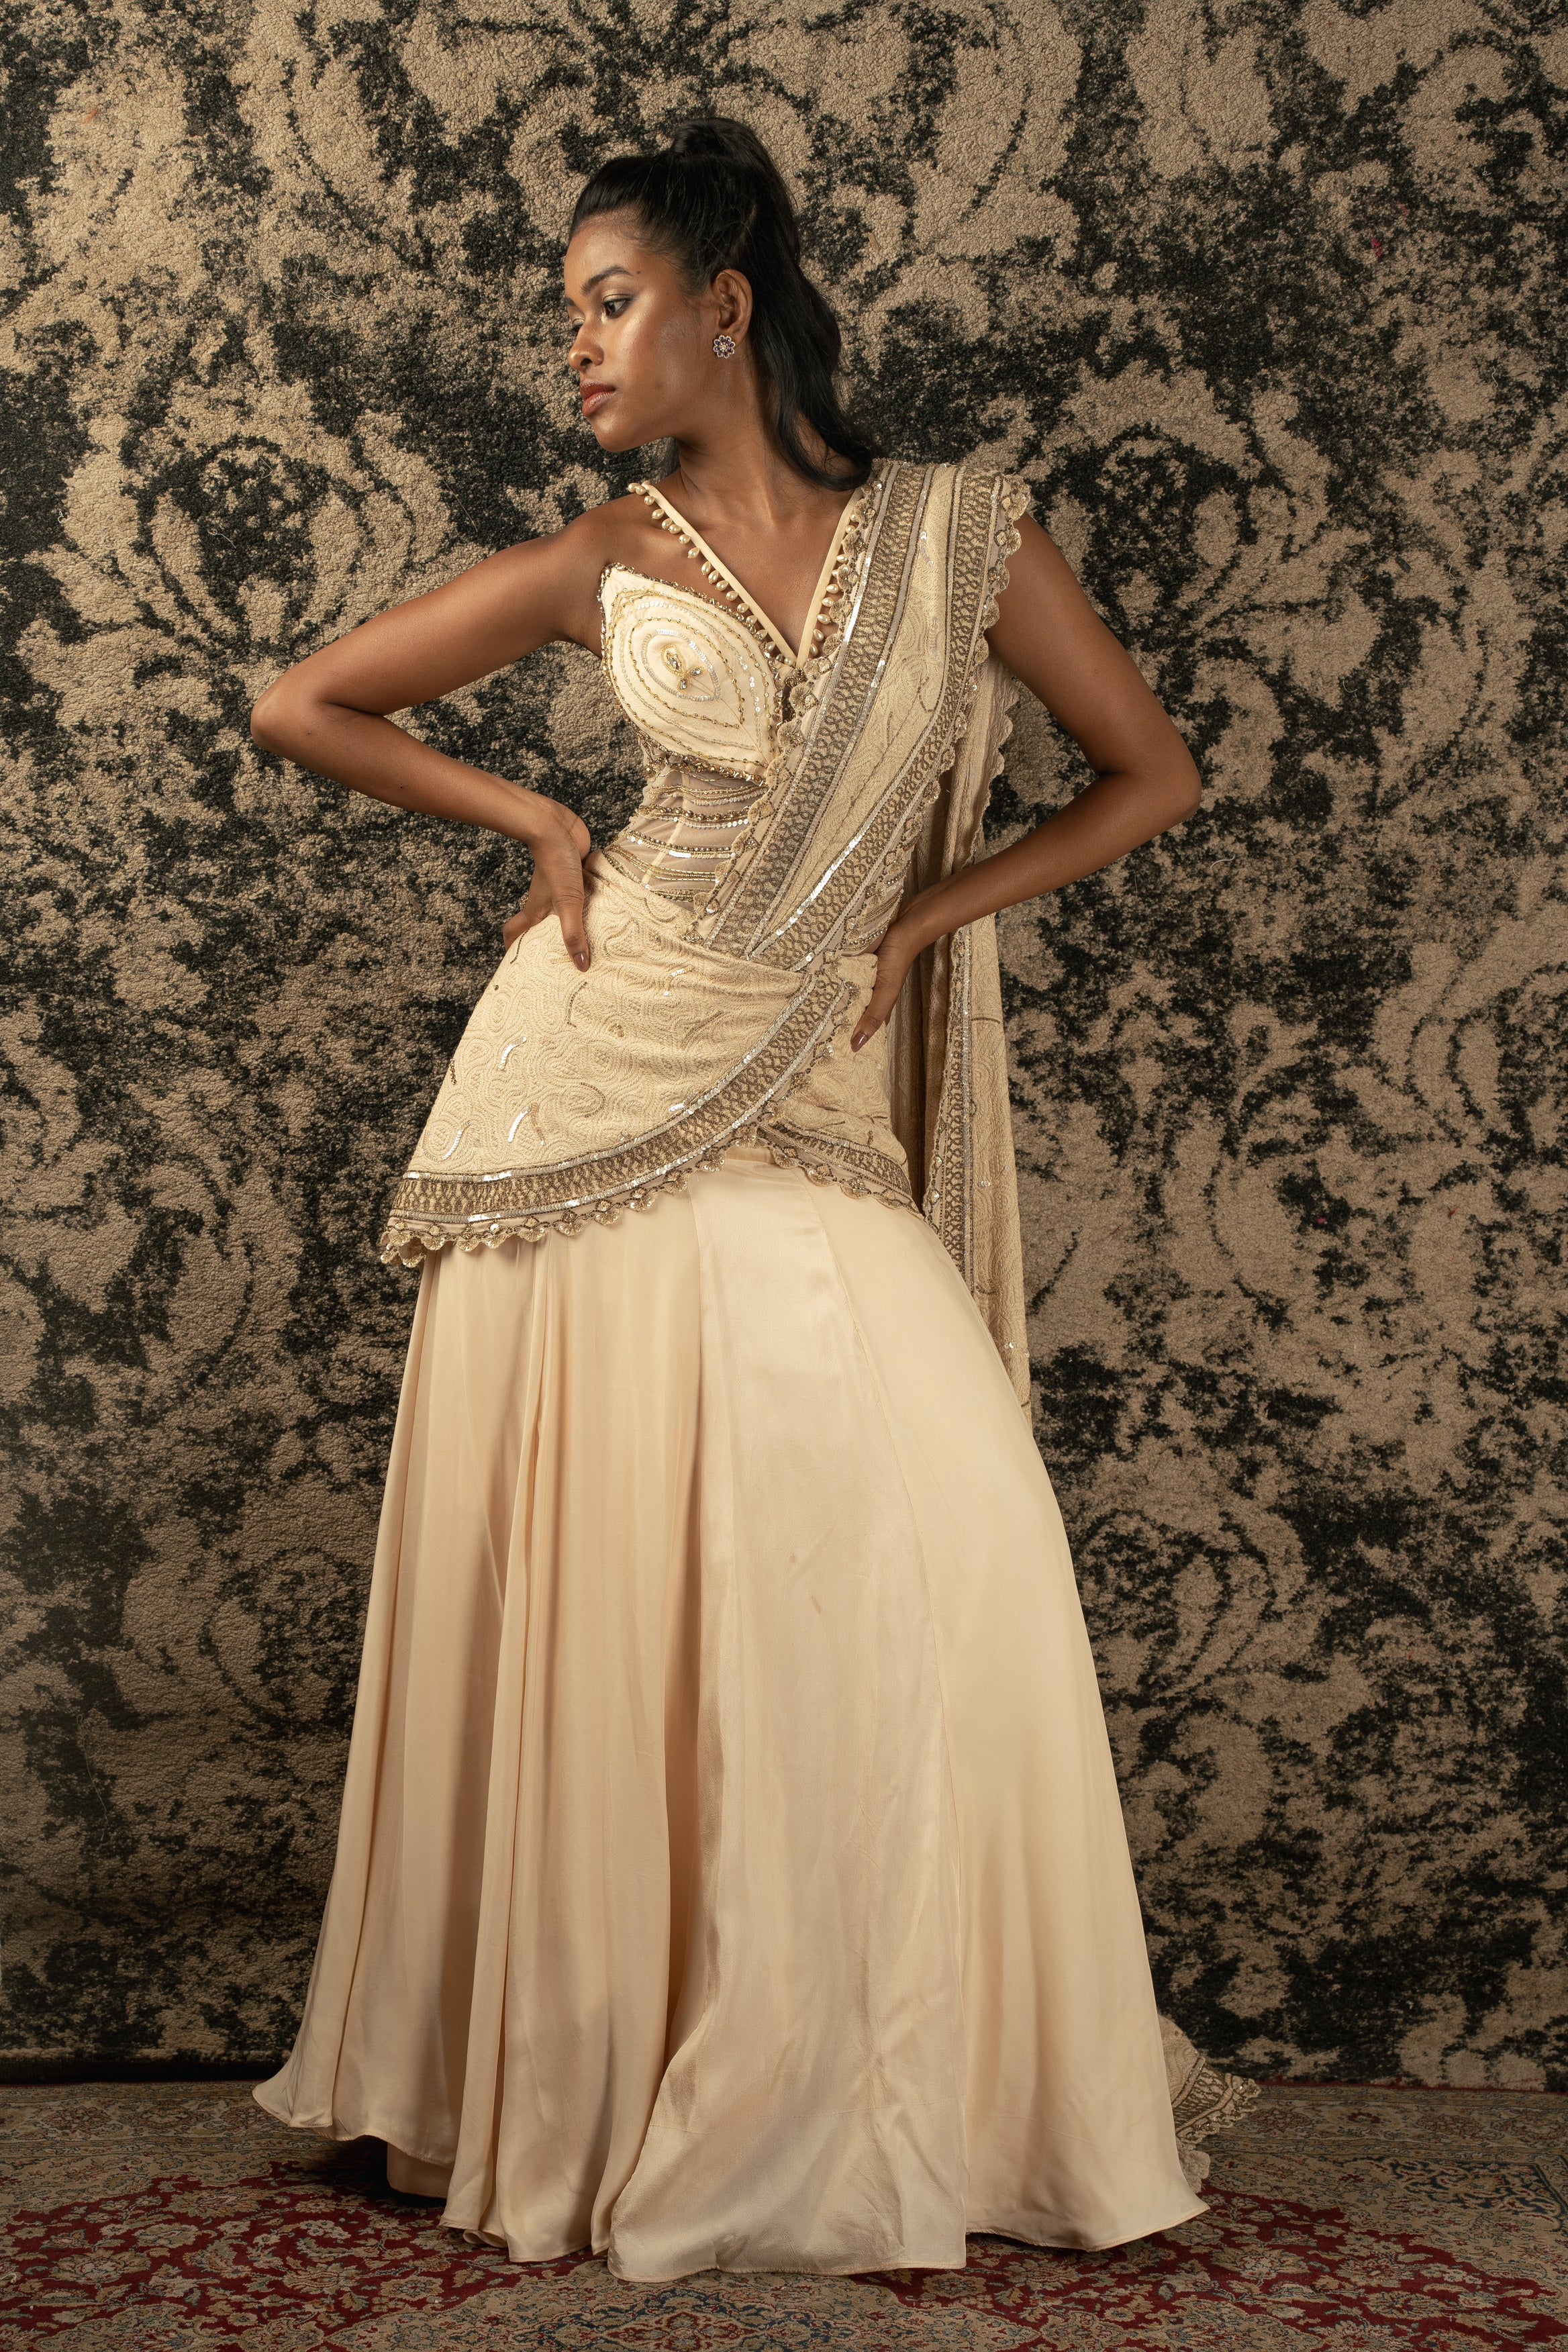 Illuminate the room in Light Gold: Silk Satin skirt paired with a Net blouse and Luckhnawi Silk drape, a radiant ensemble exuding timeless charm.